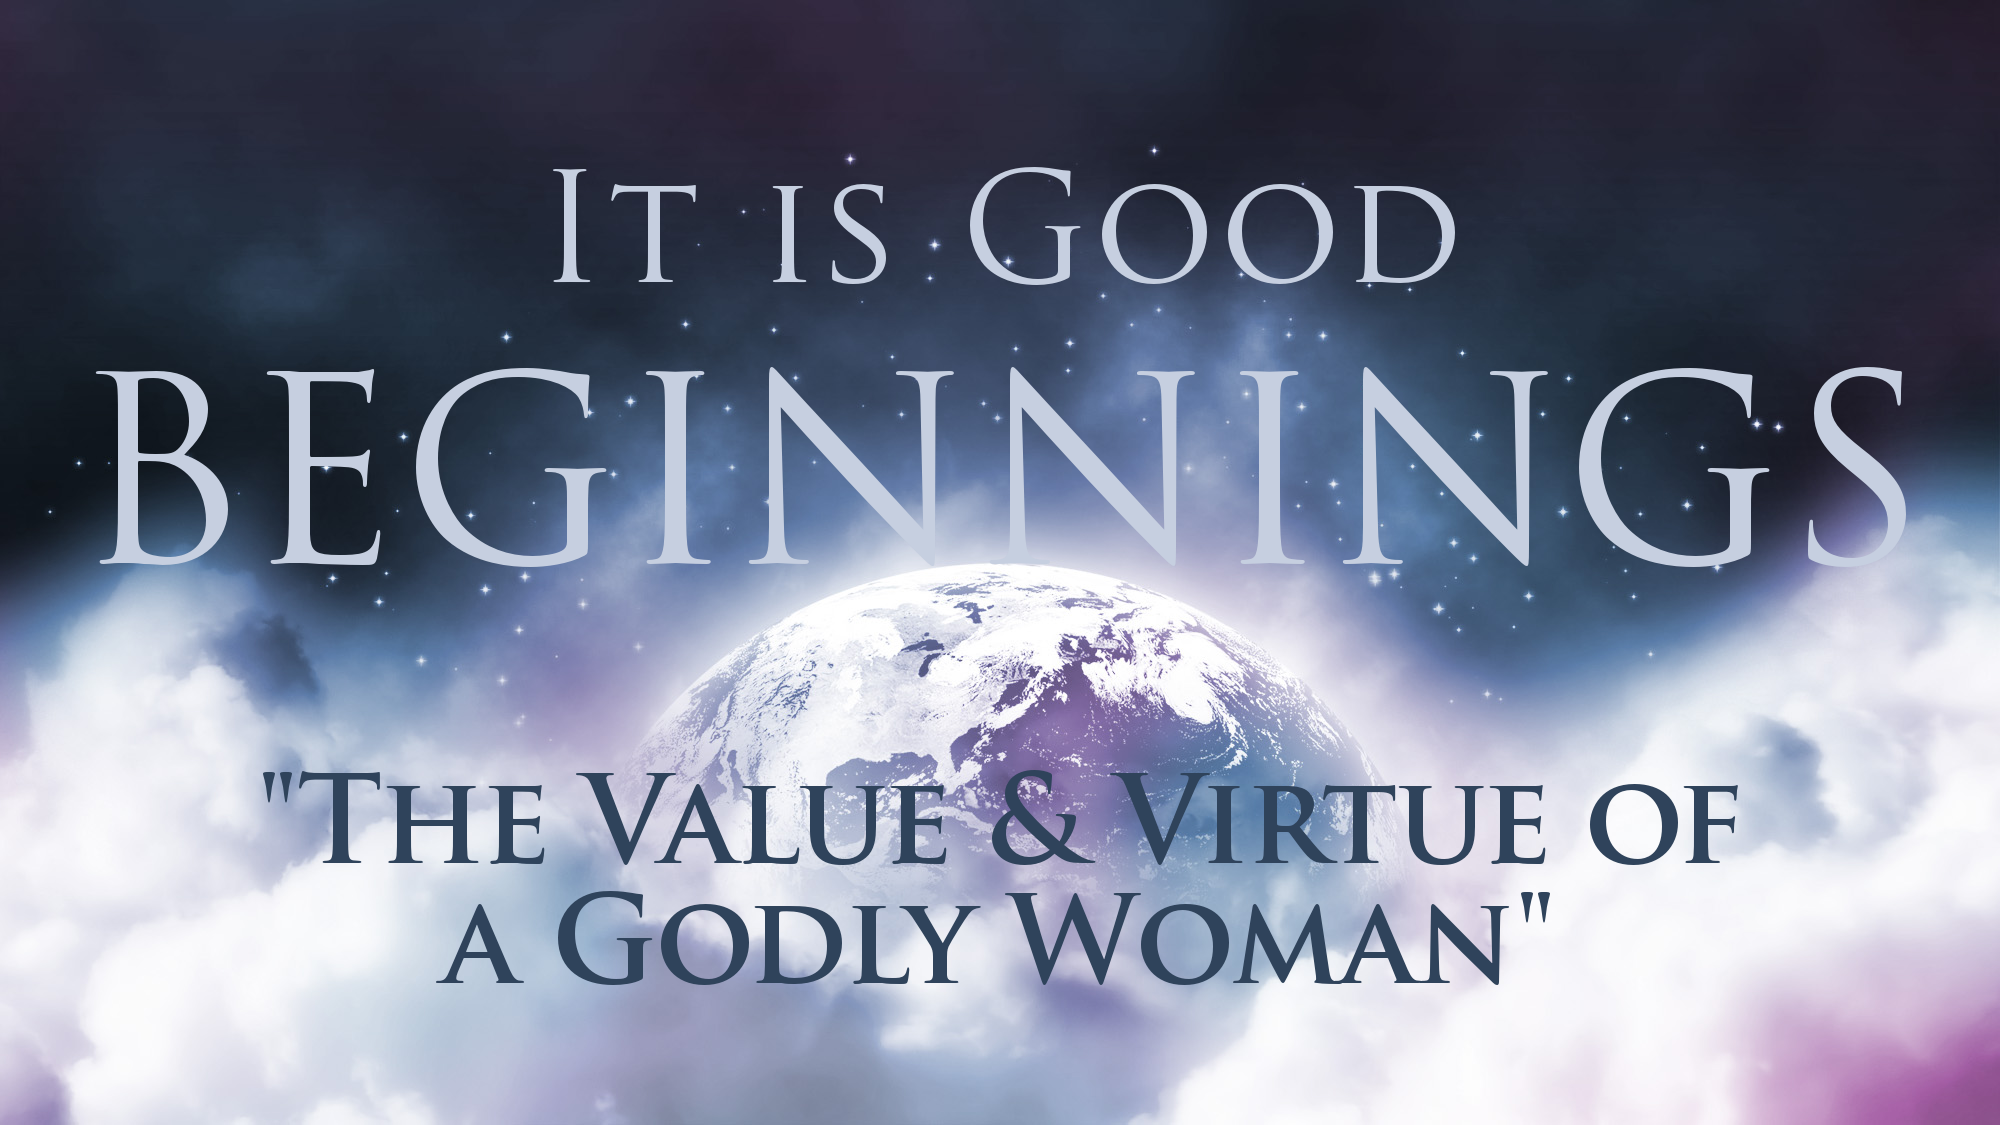 BEGINNINGS - It is Good - "The VALUE &amp; VIRTUE of a Godly Woman"